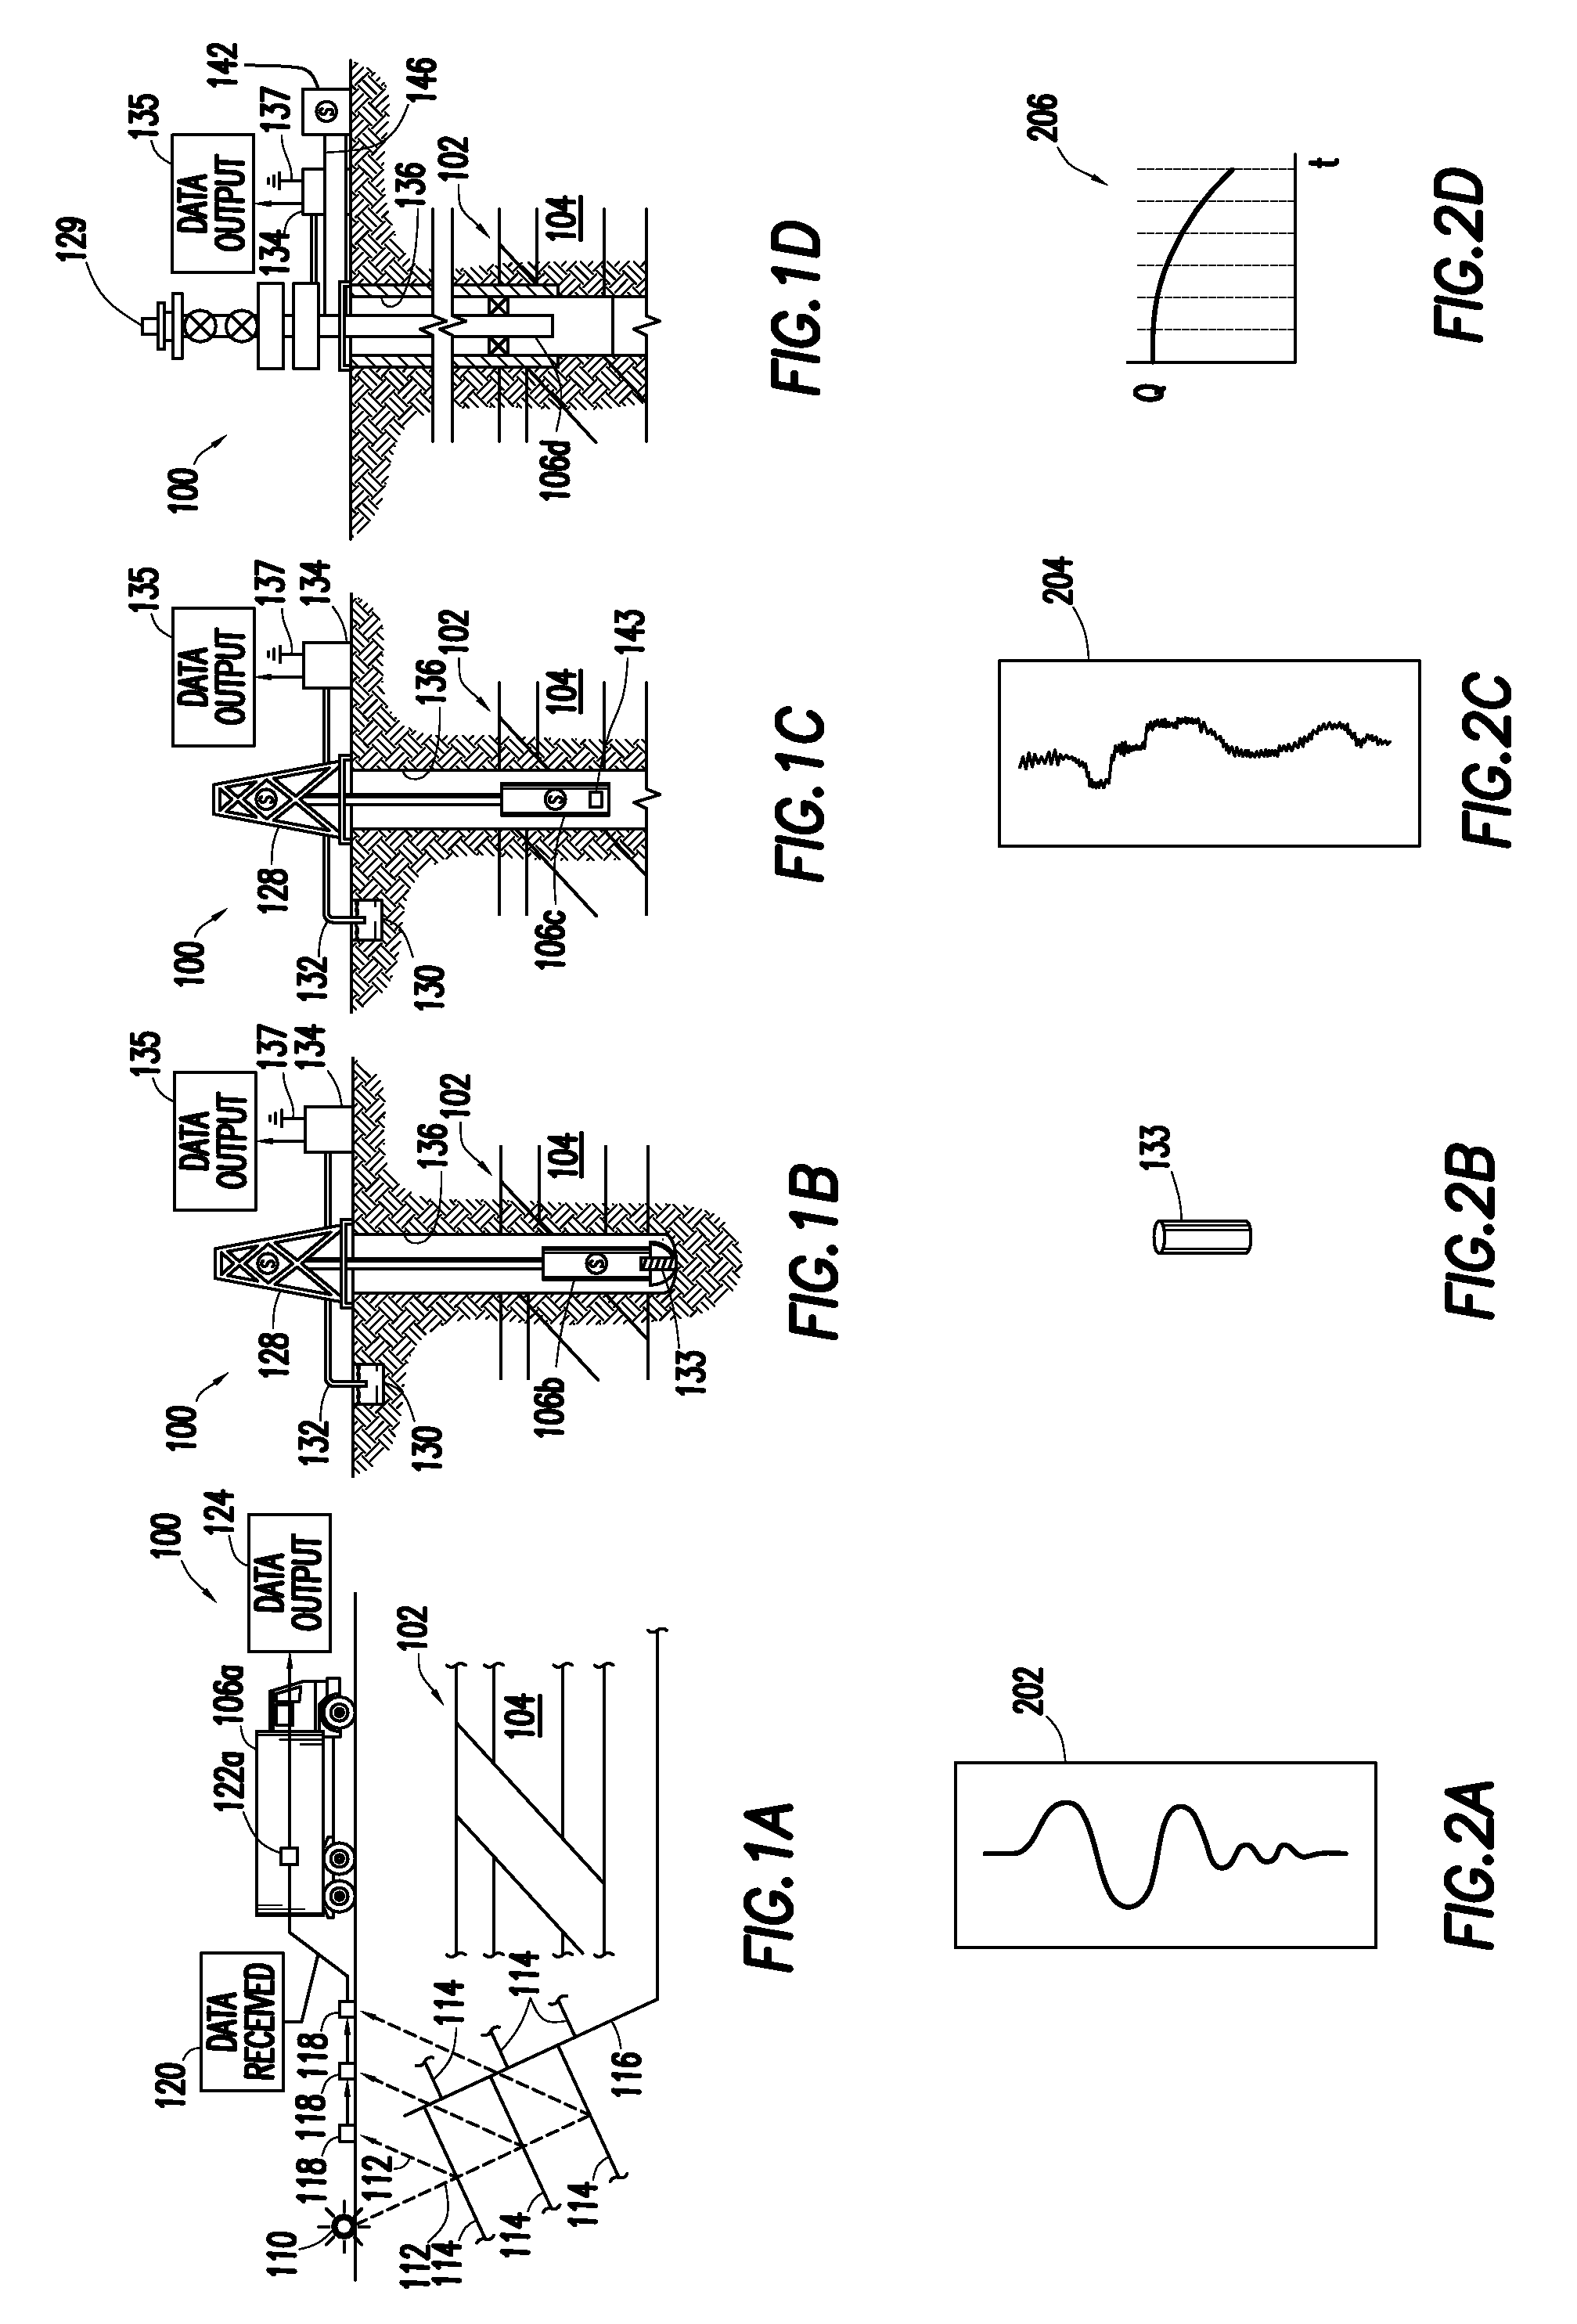 System and method for performing oilfield simulation operations